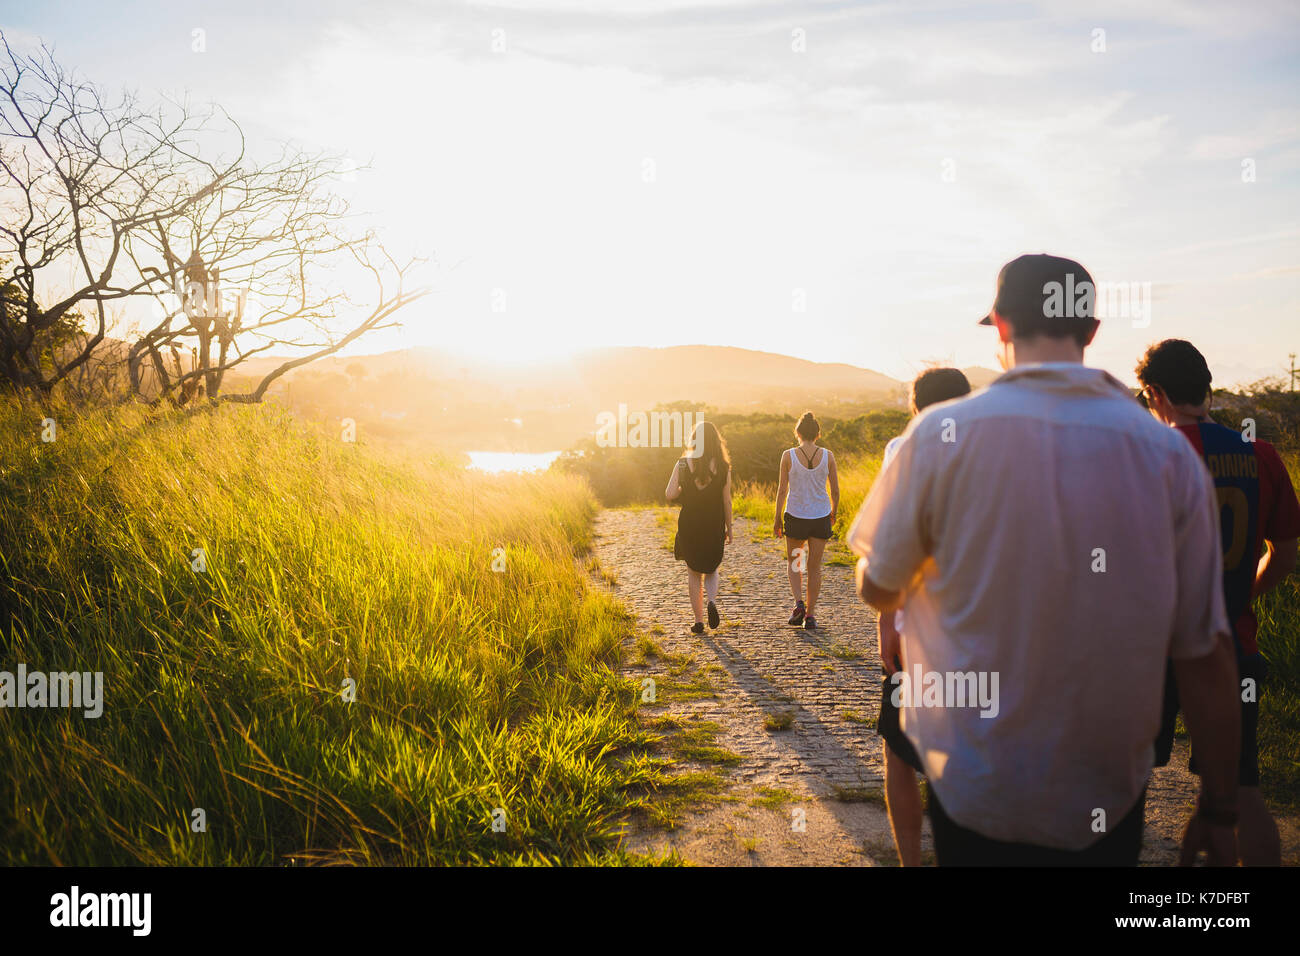 Rear view of friends walking on dirt footpath at field Stock Photo